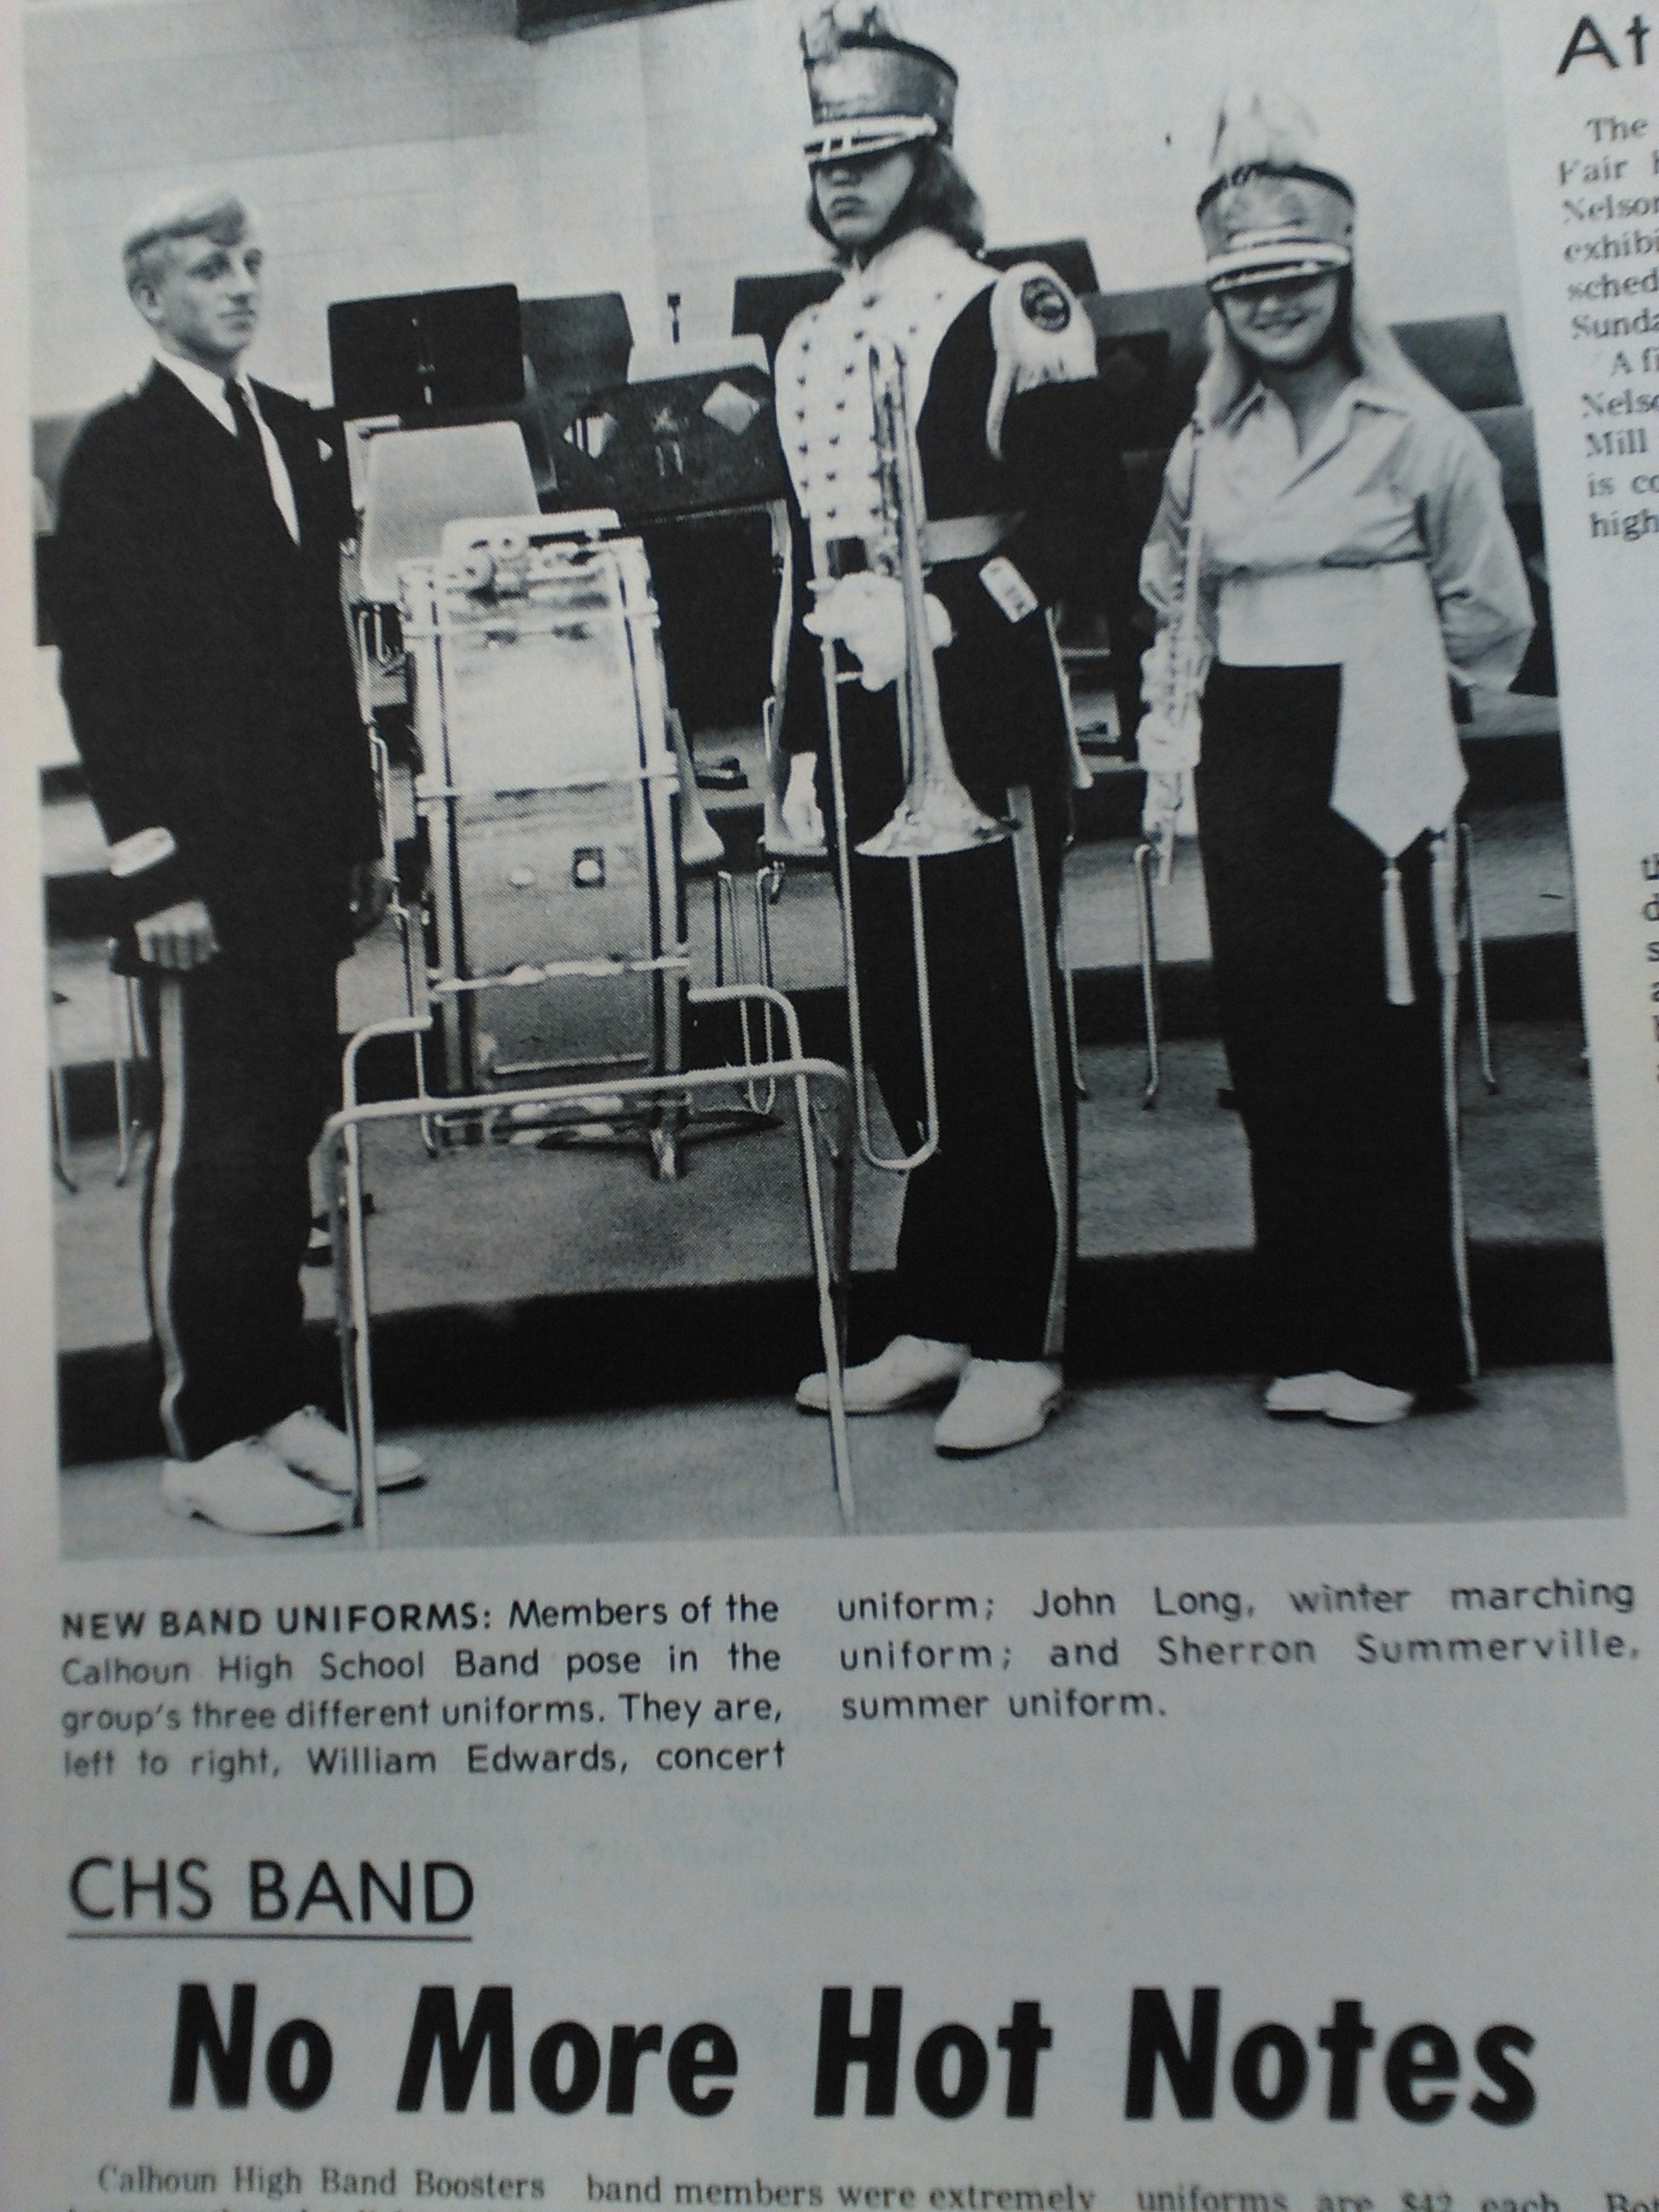 The new CHS band uniforms that came out that year.